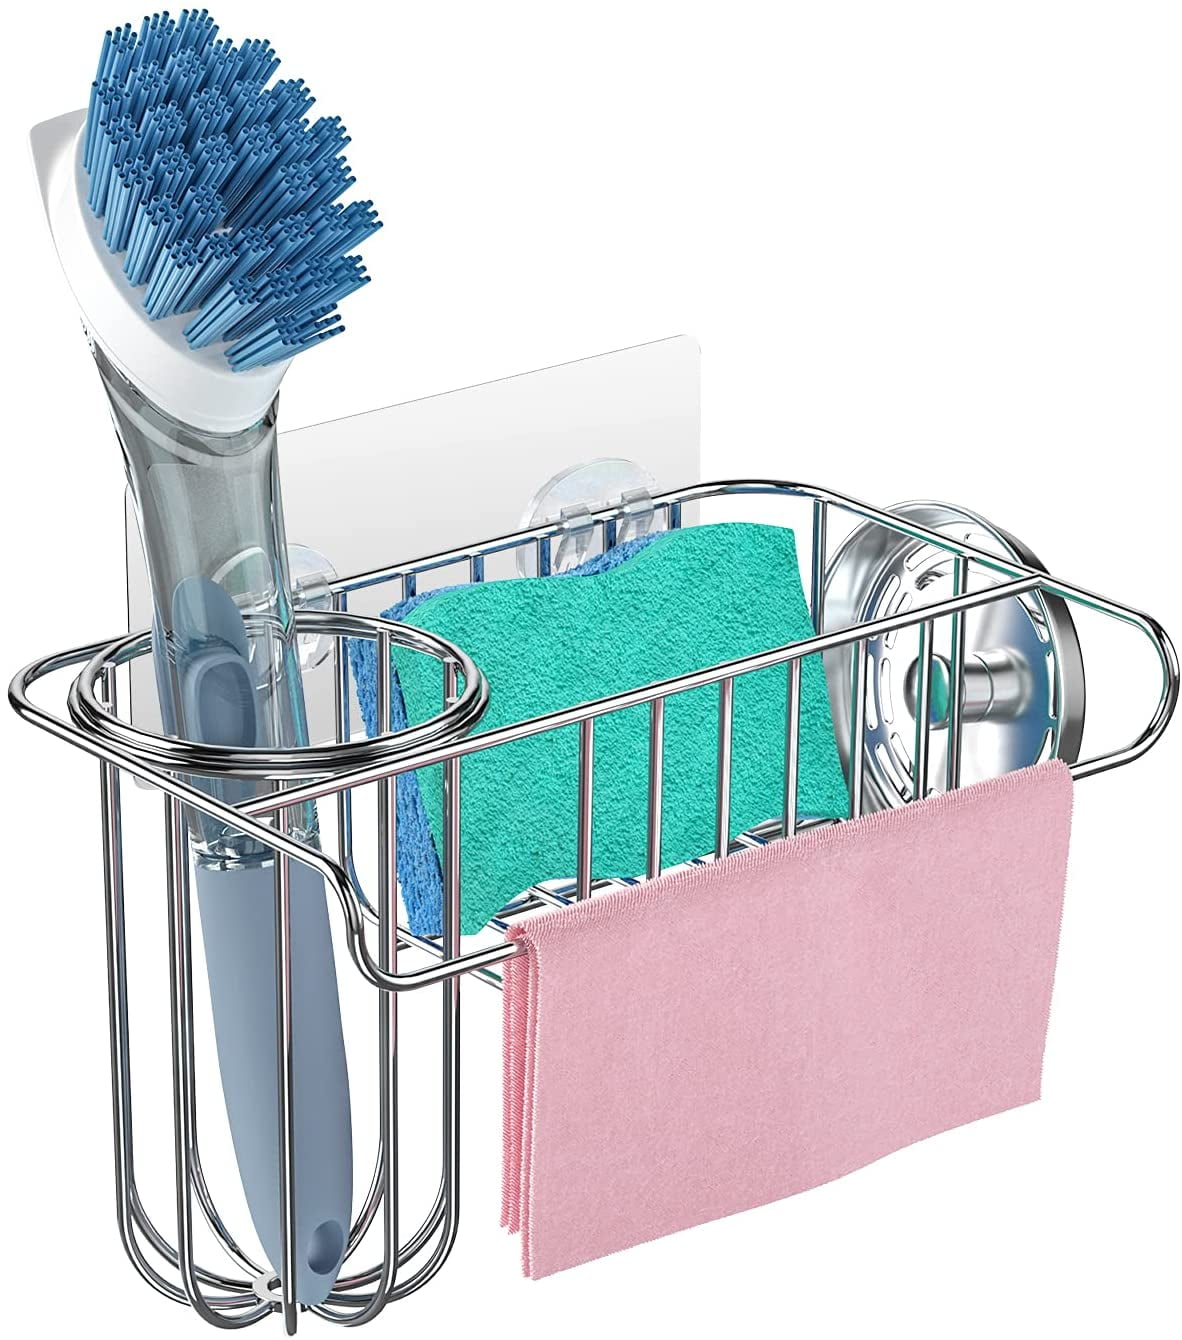 MINGFANITY Kitchen Countertop Sponge Holder, SUS 304 Stainless Steel Dish  SoapOrganizer, Basket for Cleaning and Scrub Tool, Kitchen Sink Brush Caddy